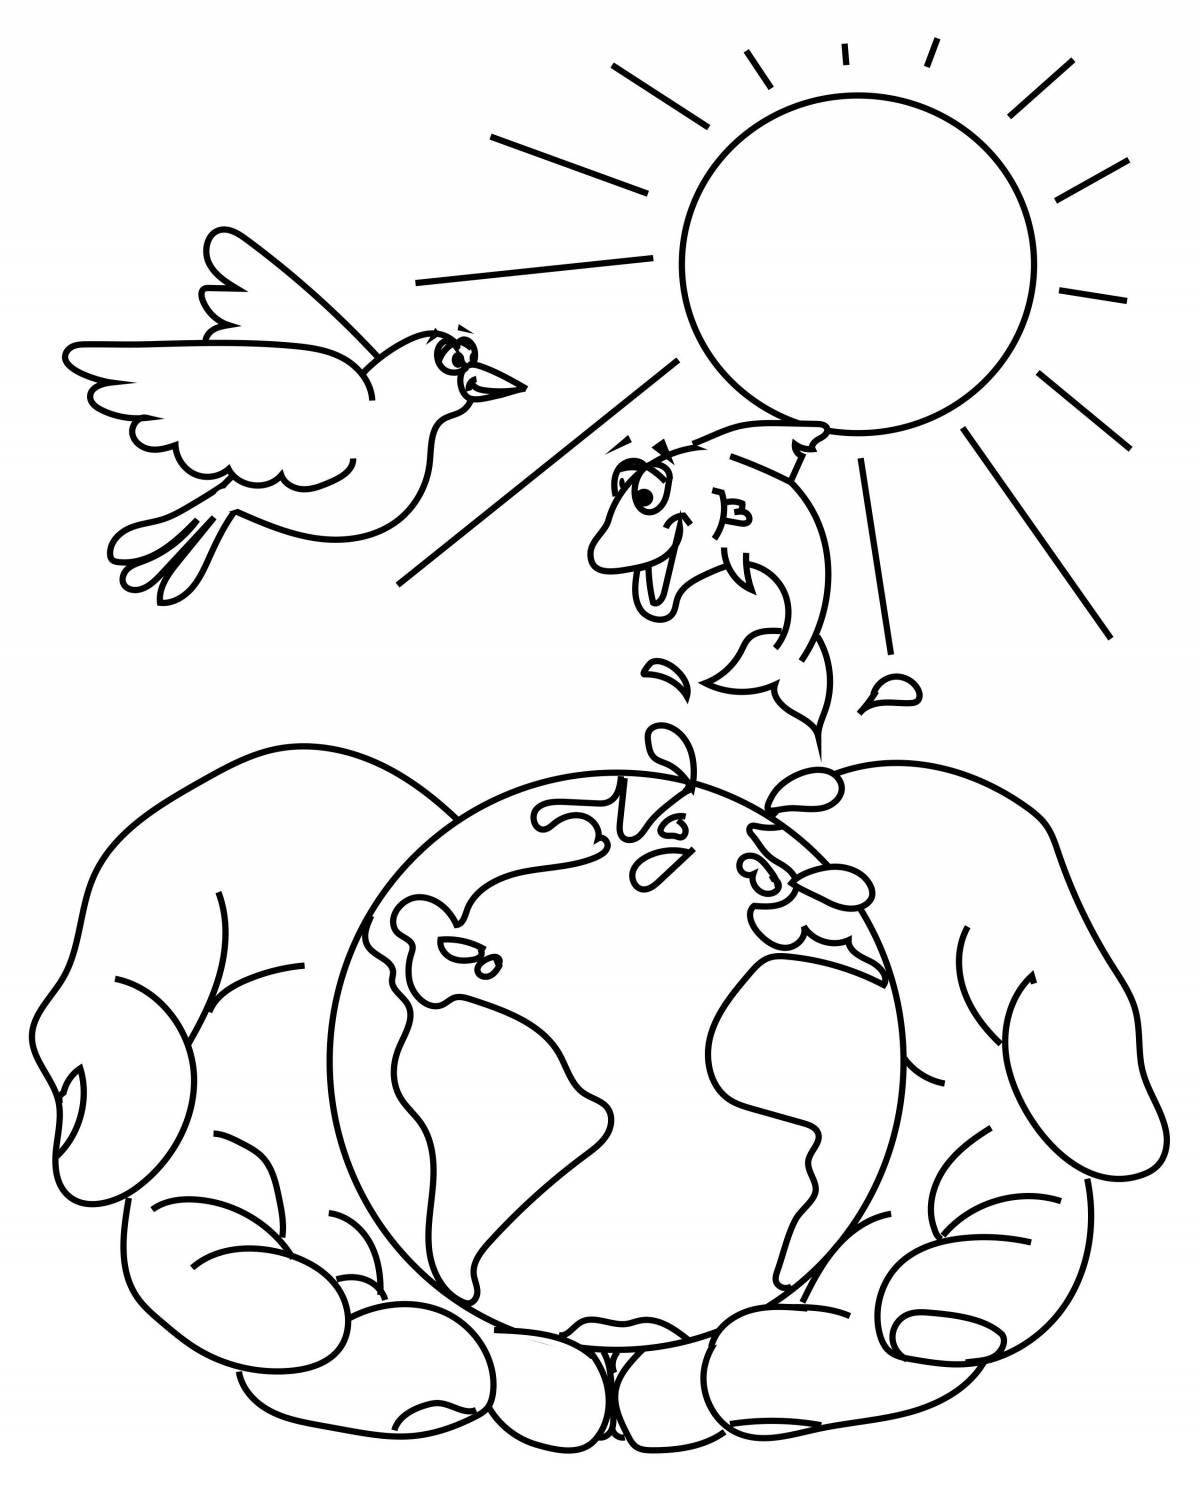 Coloring page magical world on earth